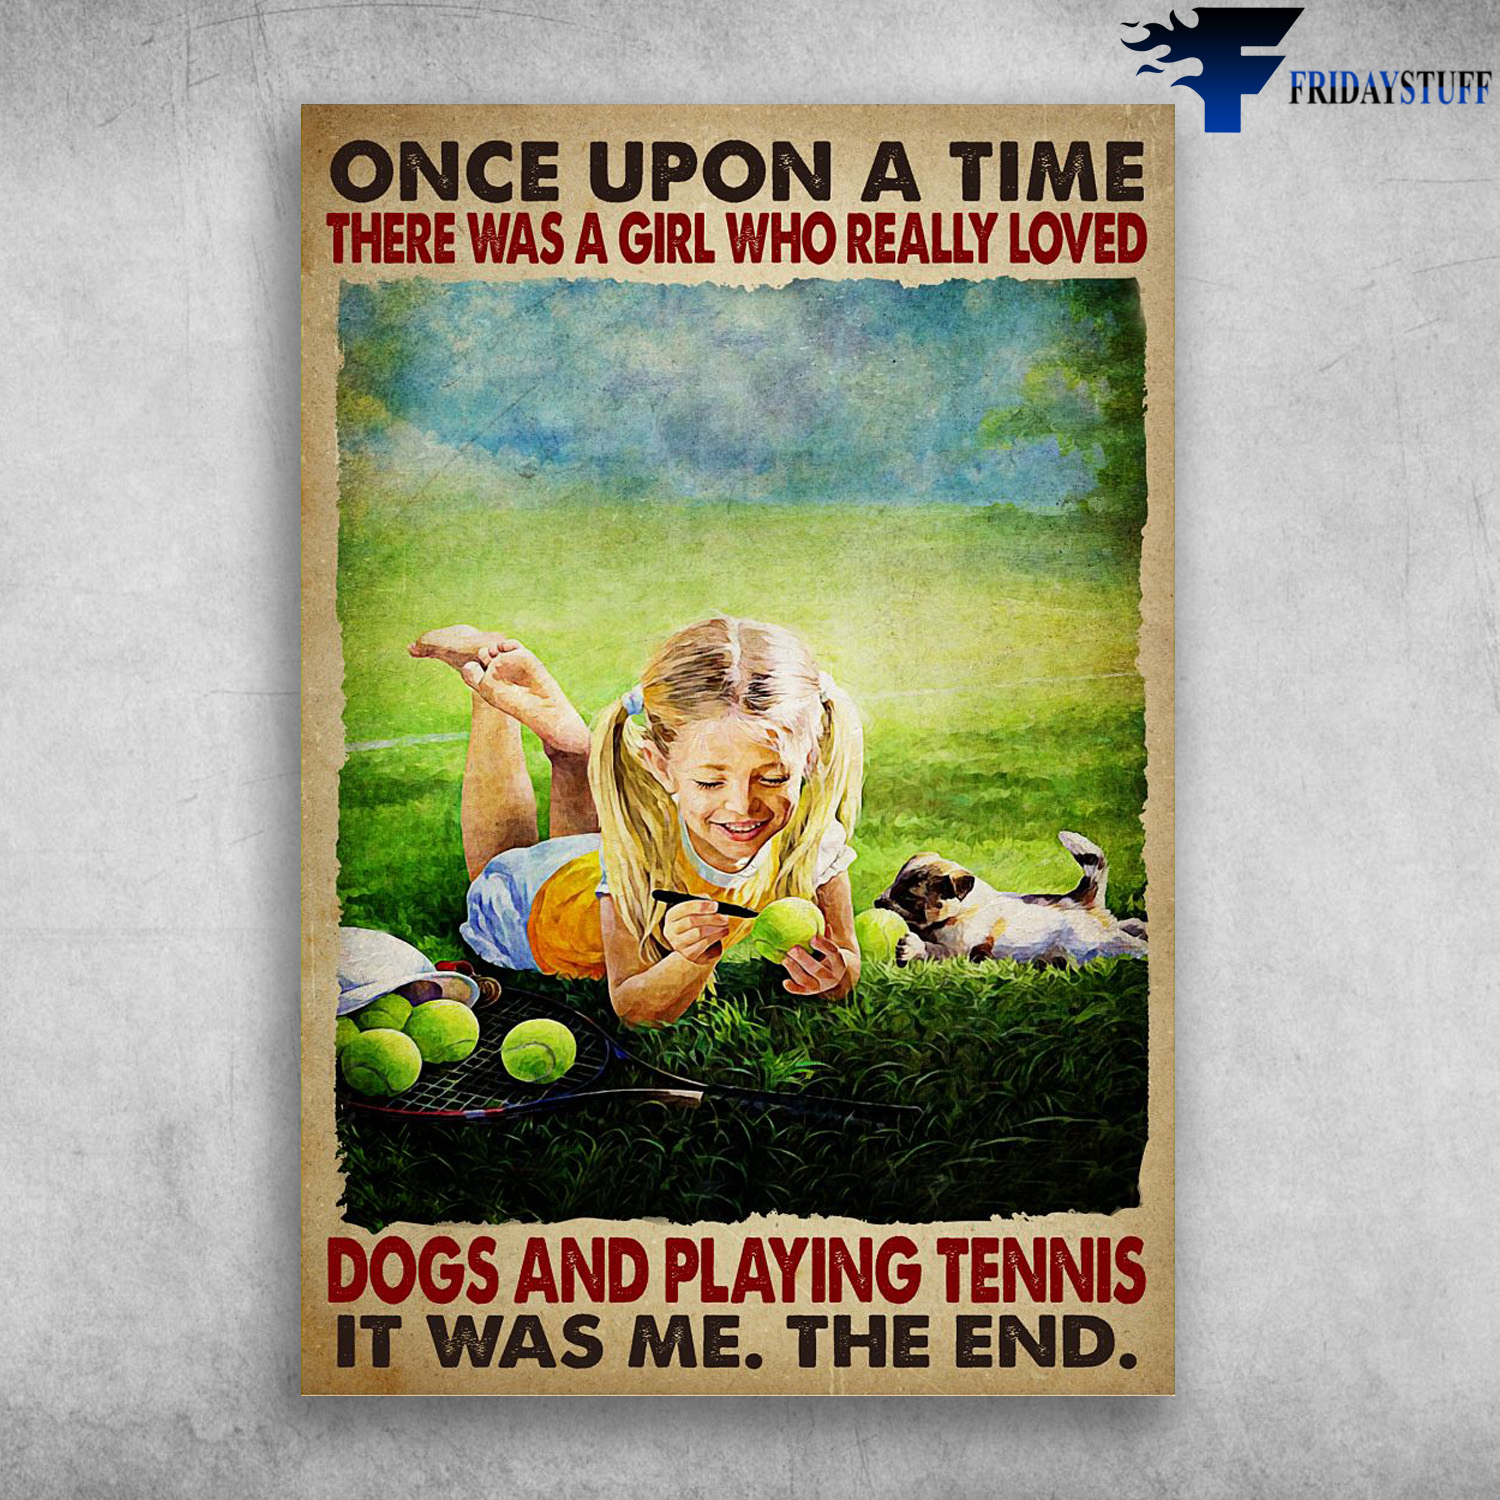 Little Girl Lovs God And Tennis - Once Upon A Time, There Was A Girl, Who Really Loved Dogs, And Playing Tennis, Is Was Me, The End